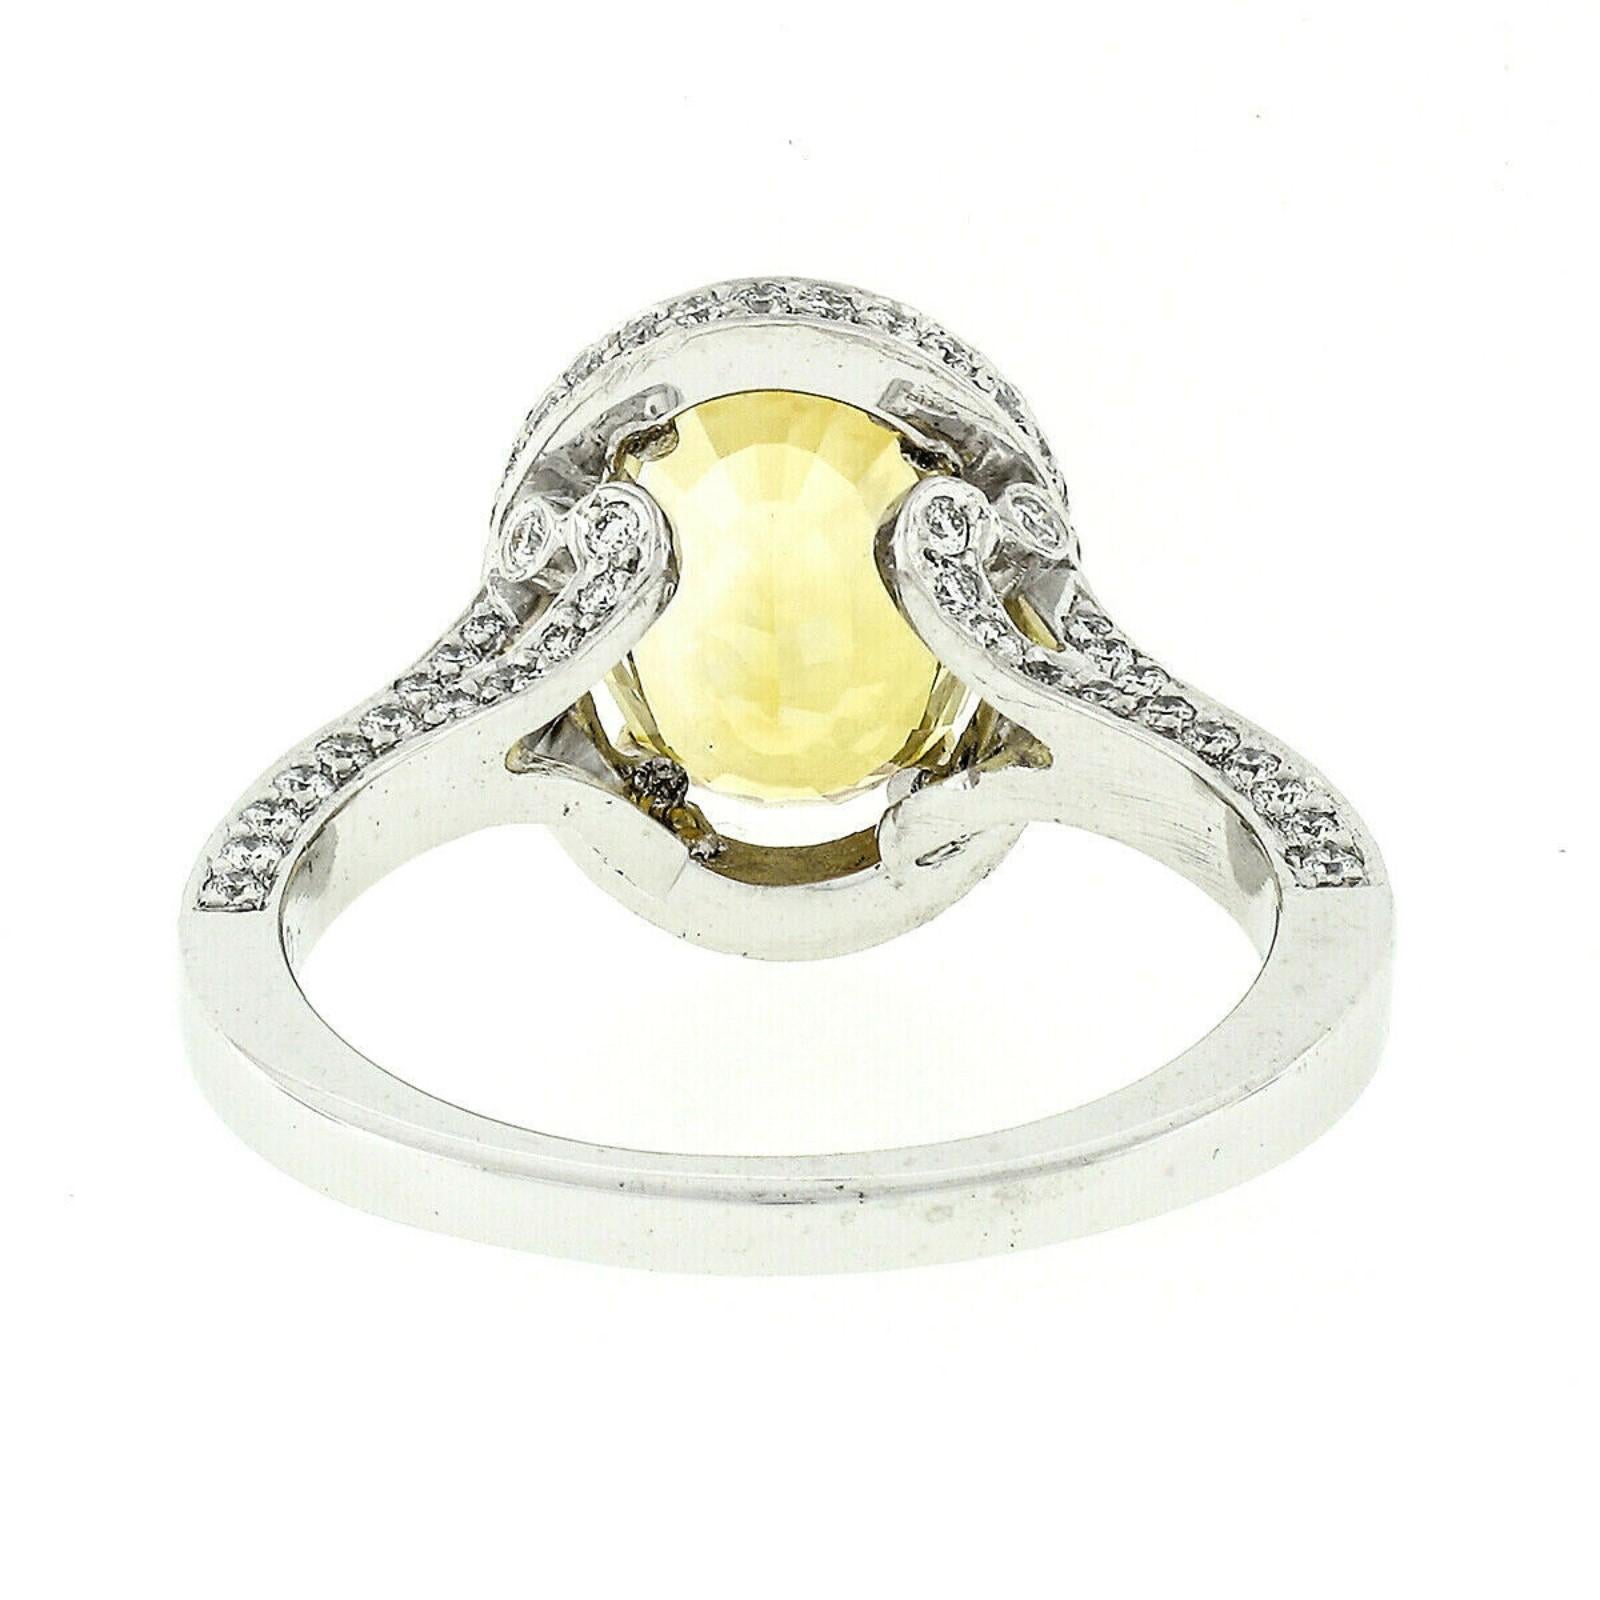 Fancy Platinum 5.6 Carat GIA Oval Yellow Sapphire and Diamond Cocktail Ring 4